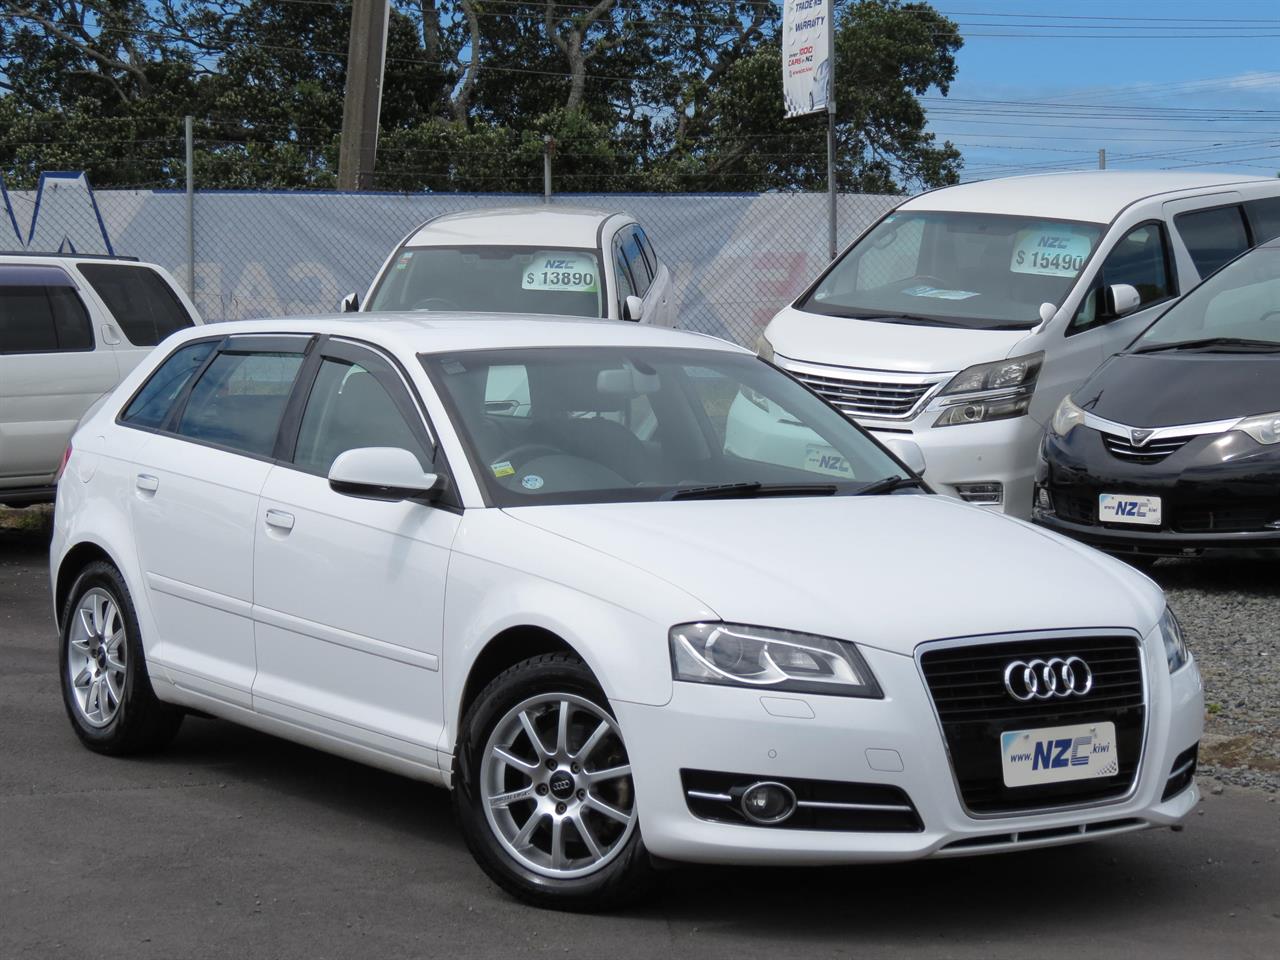 NZC 2011 Audi A3 just arrived to Auckland